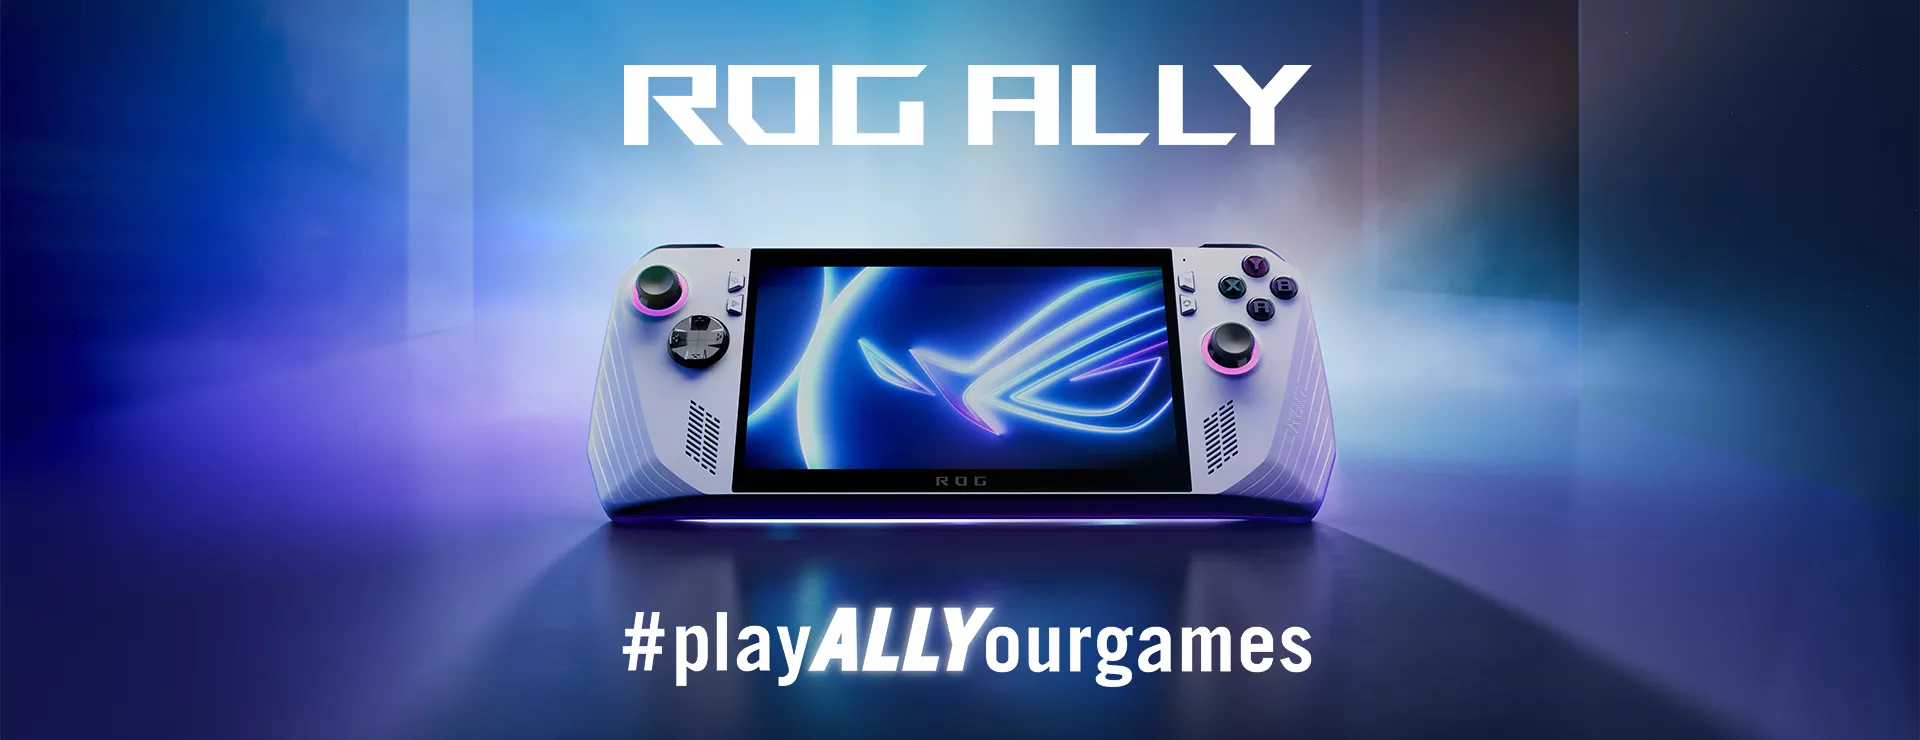 _ROG Ally and ROG Ally Travel Case on the ground with purple background, and the words “ROG Gaming handheld and accessories” captioned underneath it.